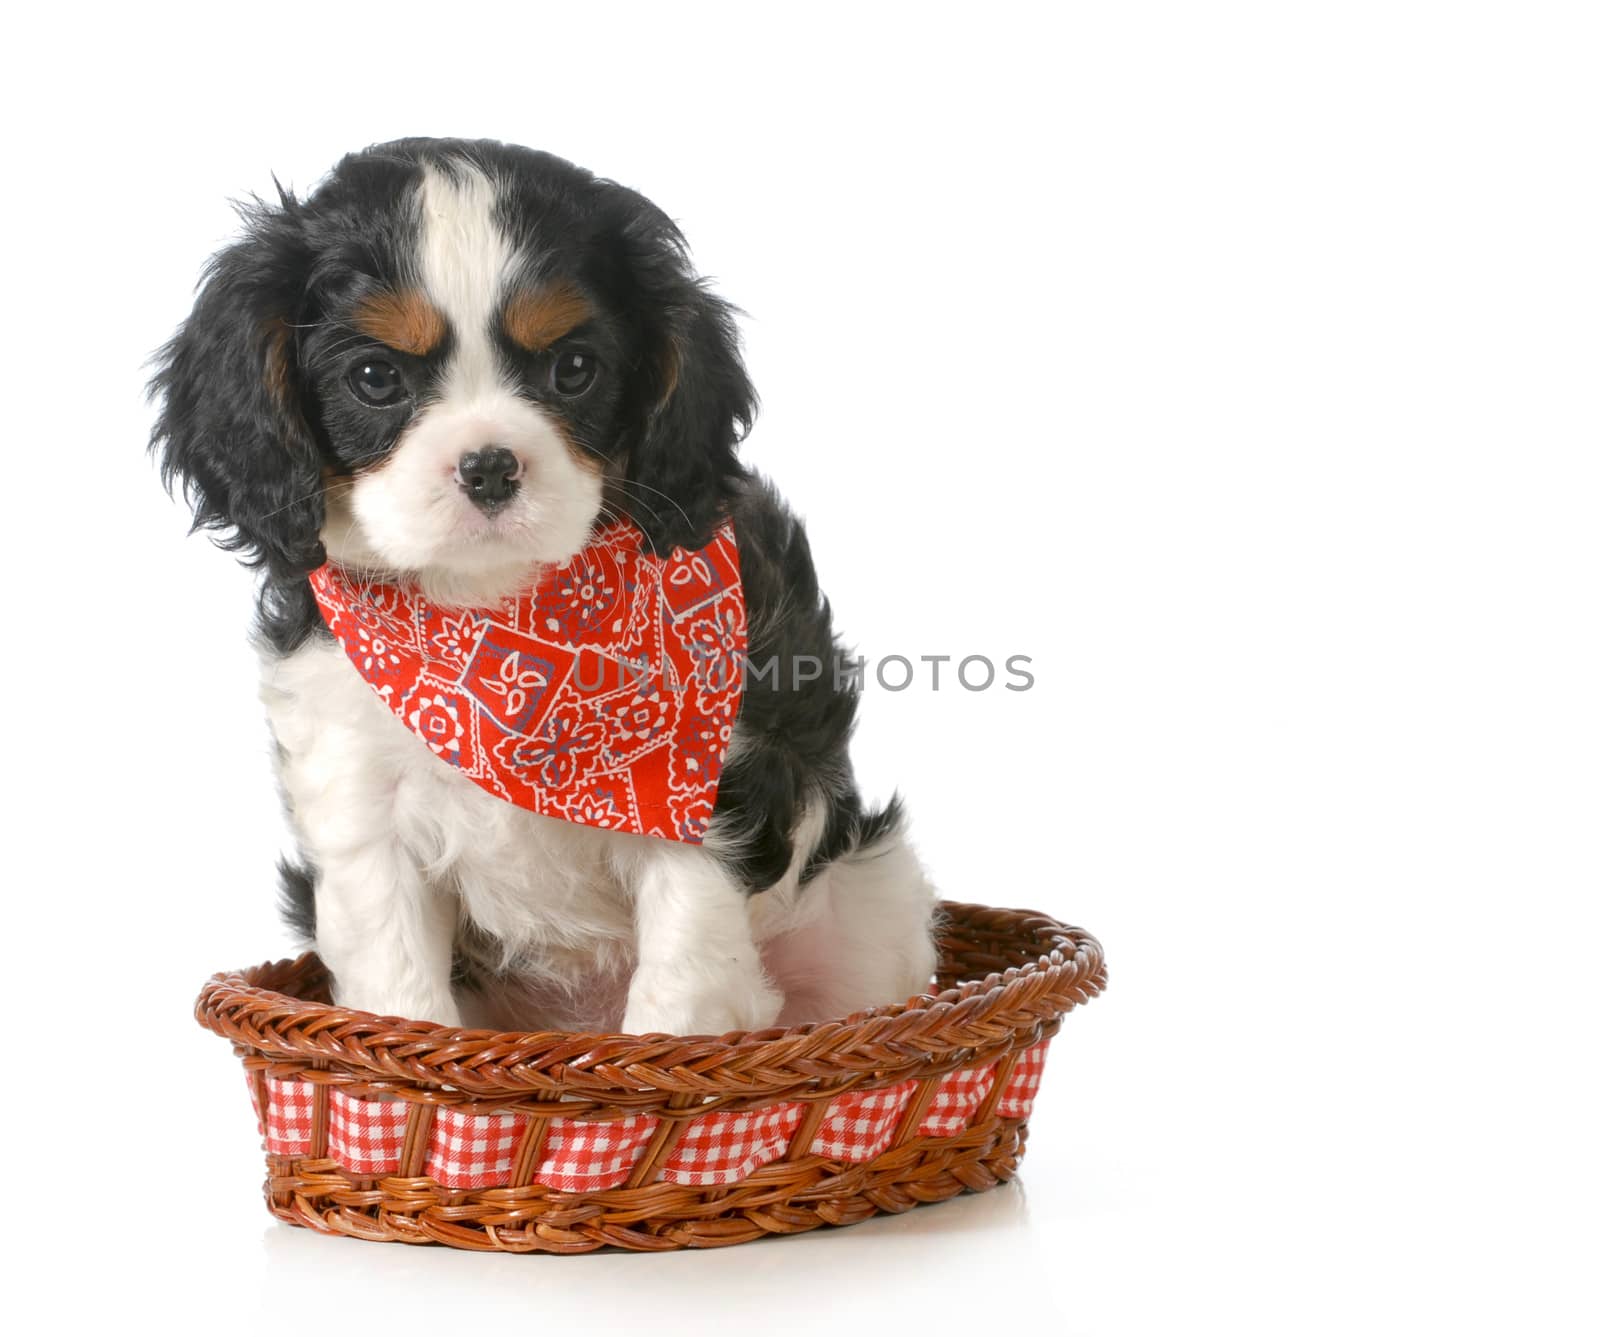 puppy - cavalier king charles spaniel puppy sitting in a basket isolated on white background - 7 weeks old 